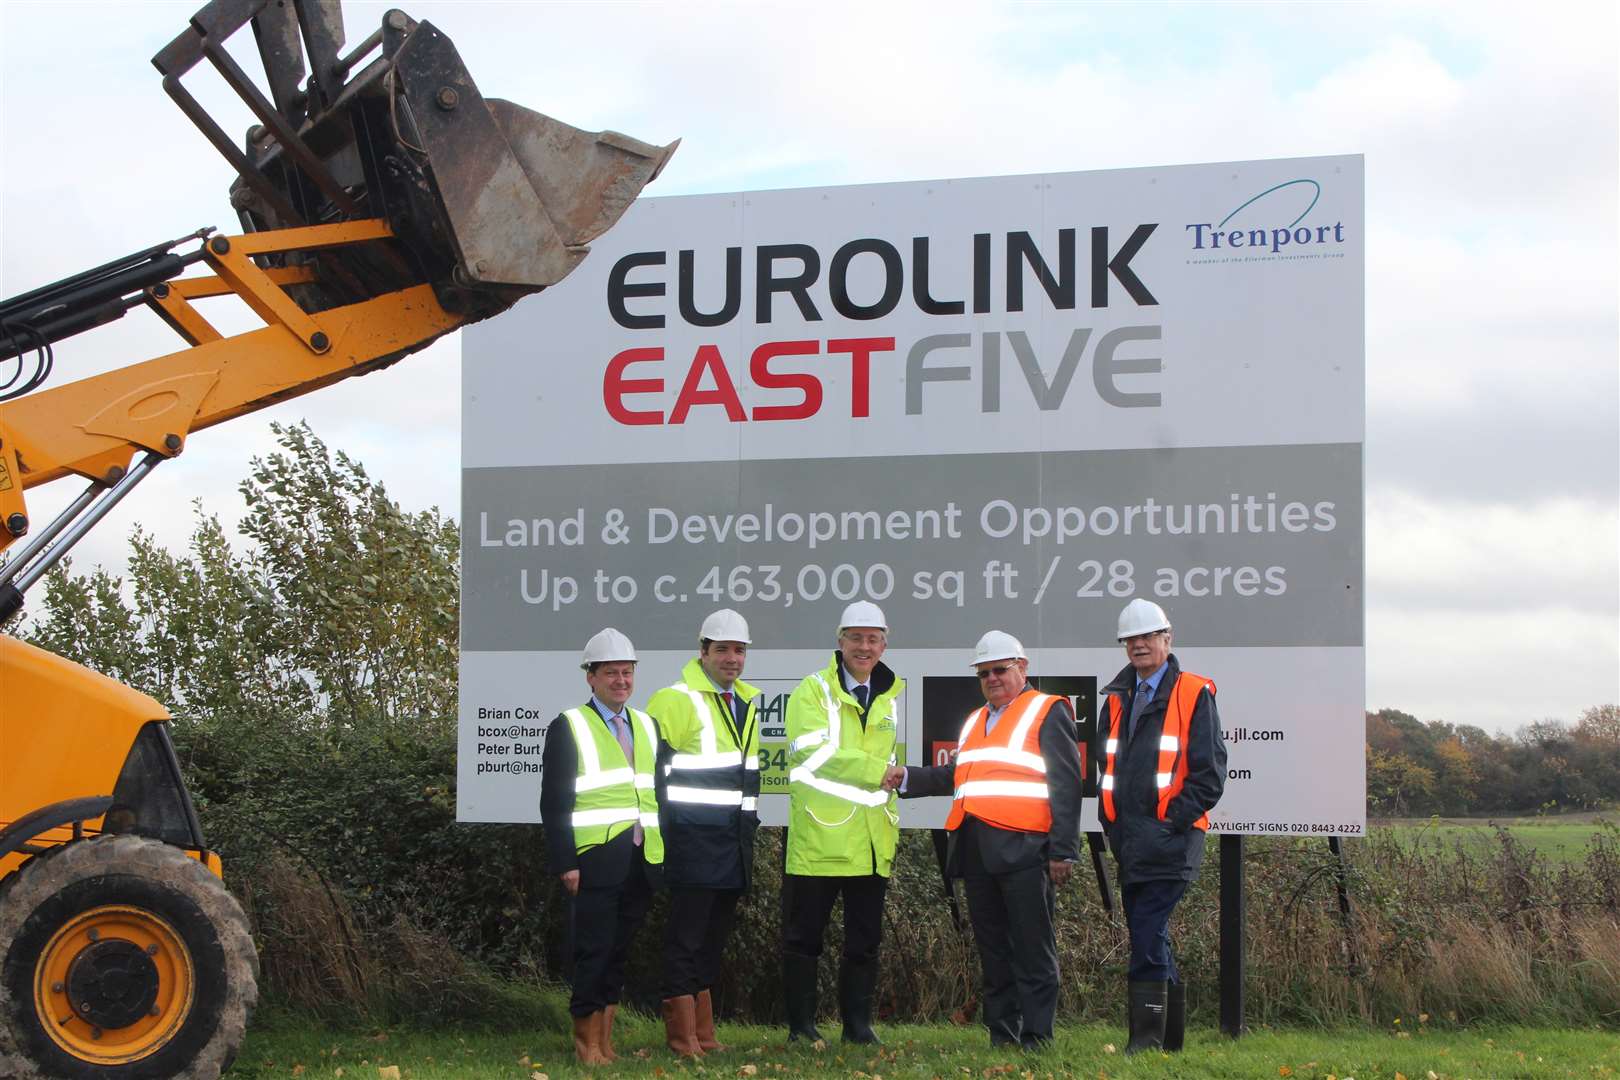 Eurolink East Five is launched by Tim Clement of Jones Lang Lasalle, Jonathan Rogers of Harrisons Chartered Surveyors, Trenport Investments estates director Richard Hall, Swale Borough Council leader Cllr Andrew Bowles and cabinet member for regeneration Cllr Mike Cosgrove